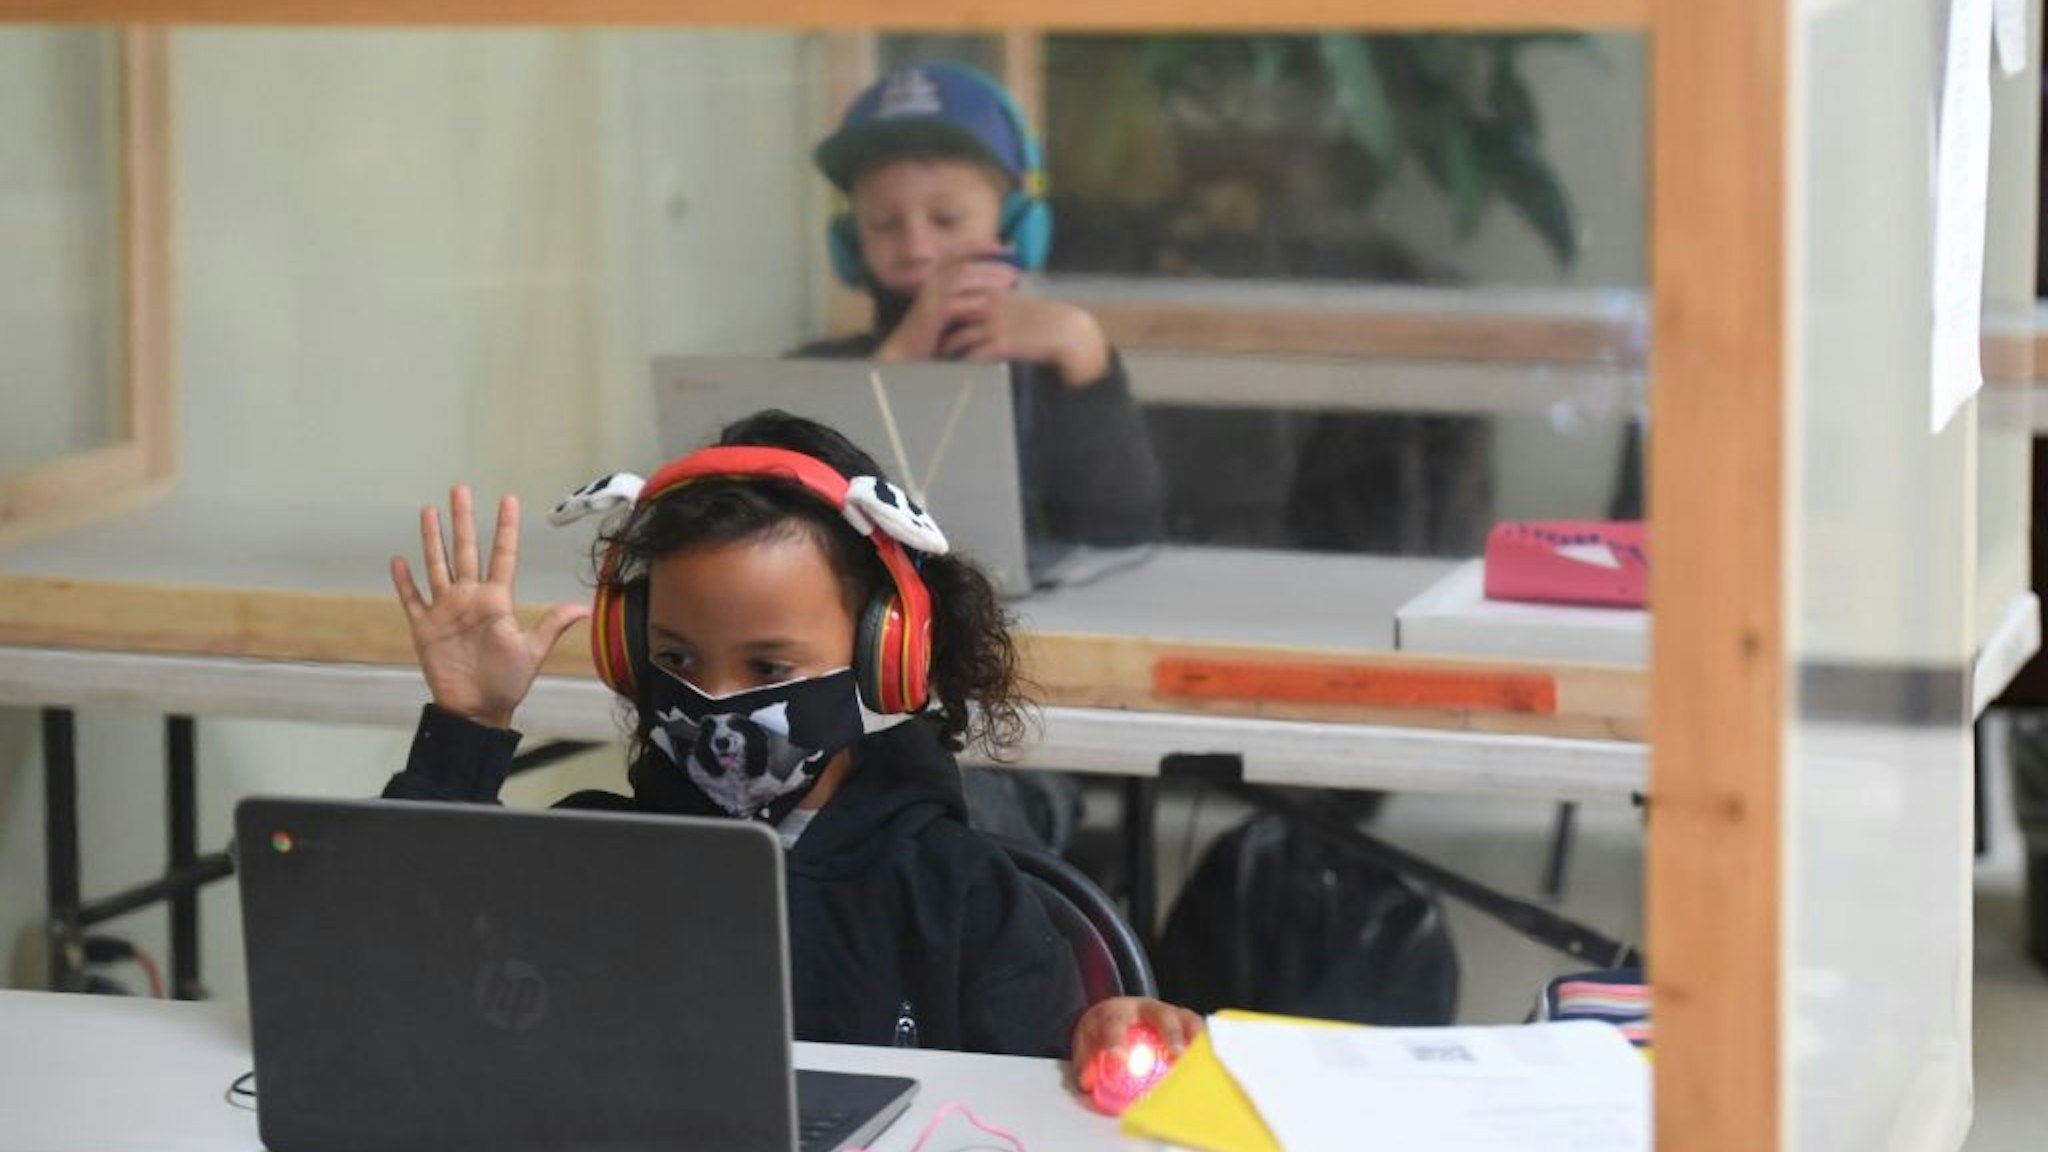 Students follow along remotely with their regular school teacher's online live lesson from separated by plastic barriers at STAR Eco Station Tutoring & Enrichment Center on September 10, 2020 in Culver City, California.